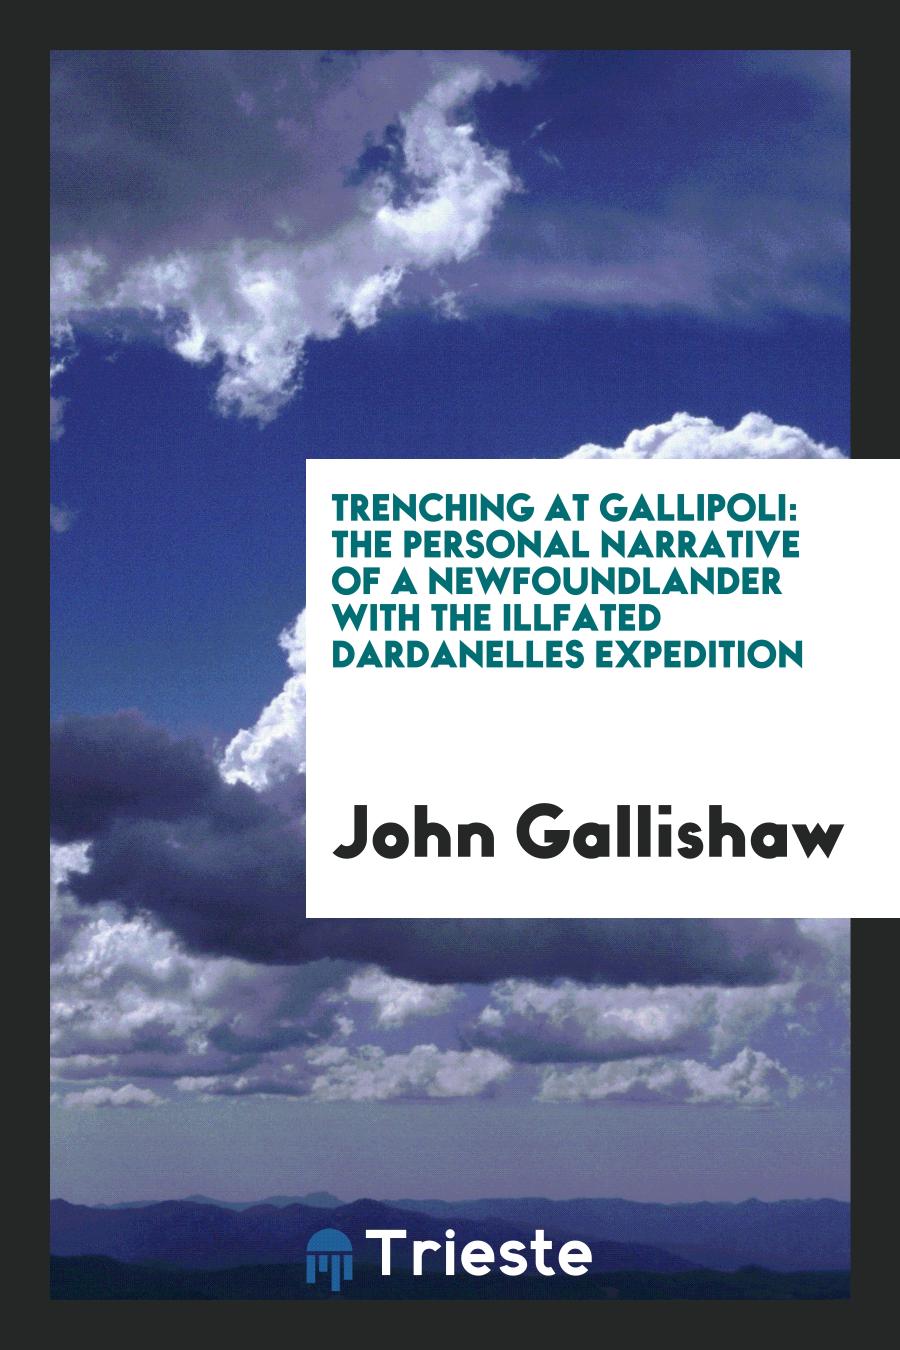 Trenching at Gallipoli: The Personal Narrative of a Newfoundlander with the Illfated Dardanelles Expedition